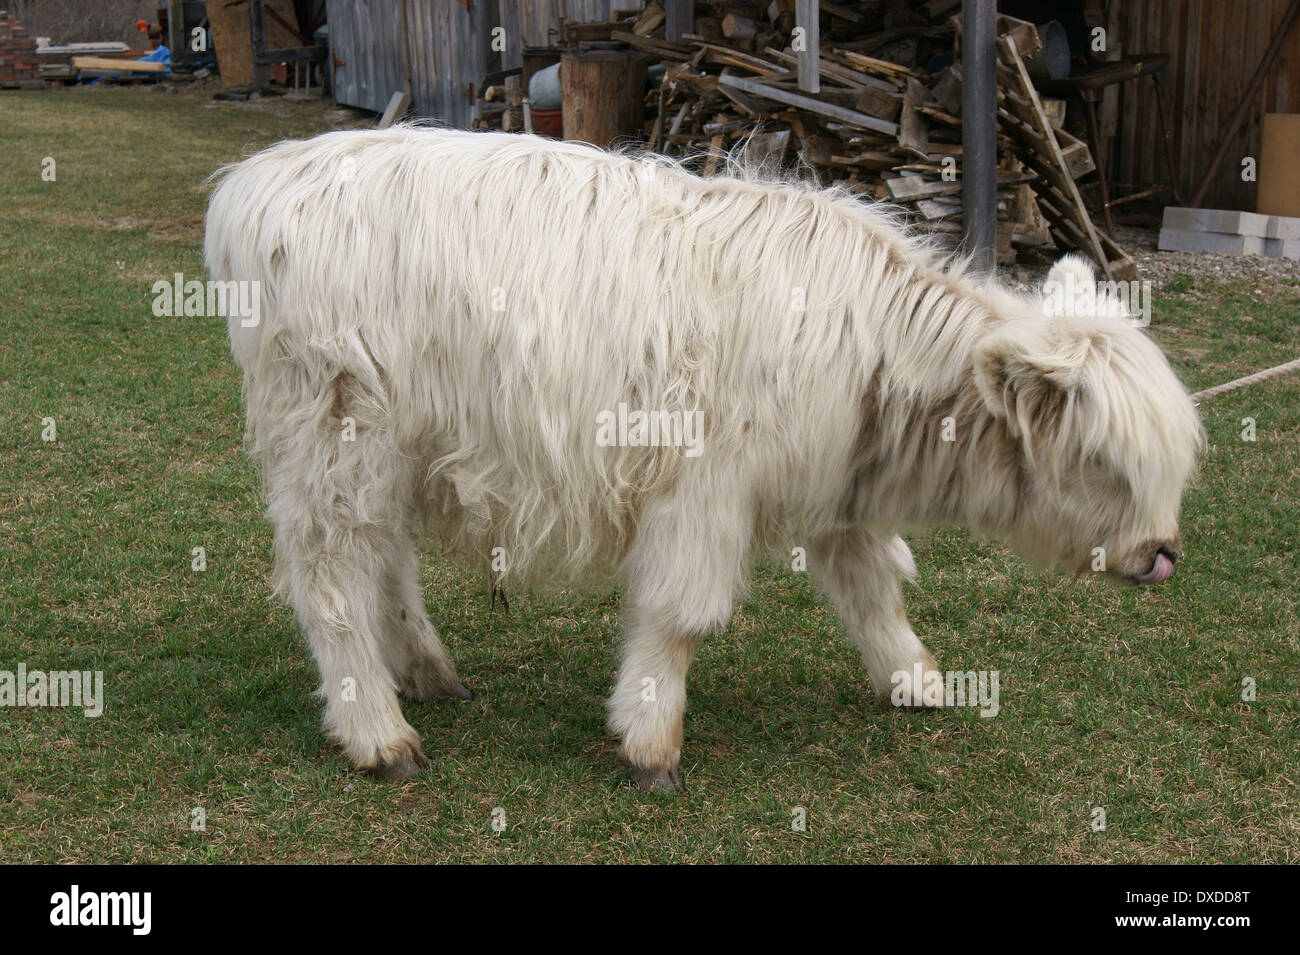 Young Highland cattle cow at the Curran Homestead, Orrington, Maine. Stock Photo